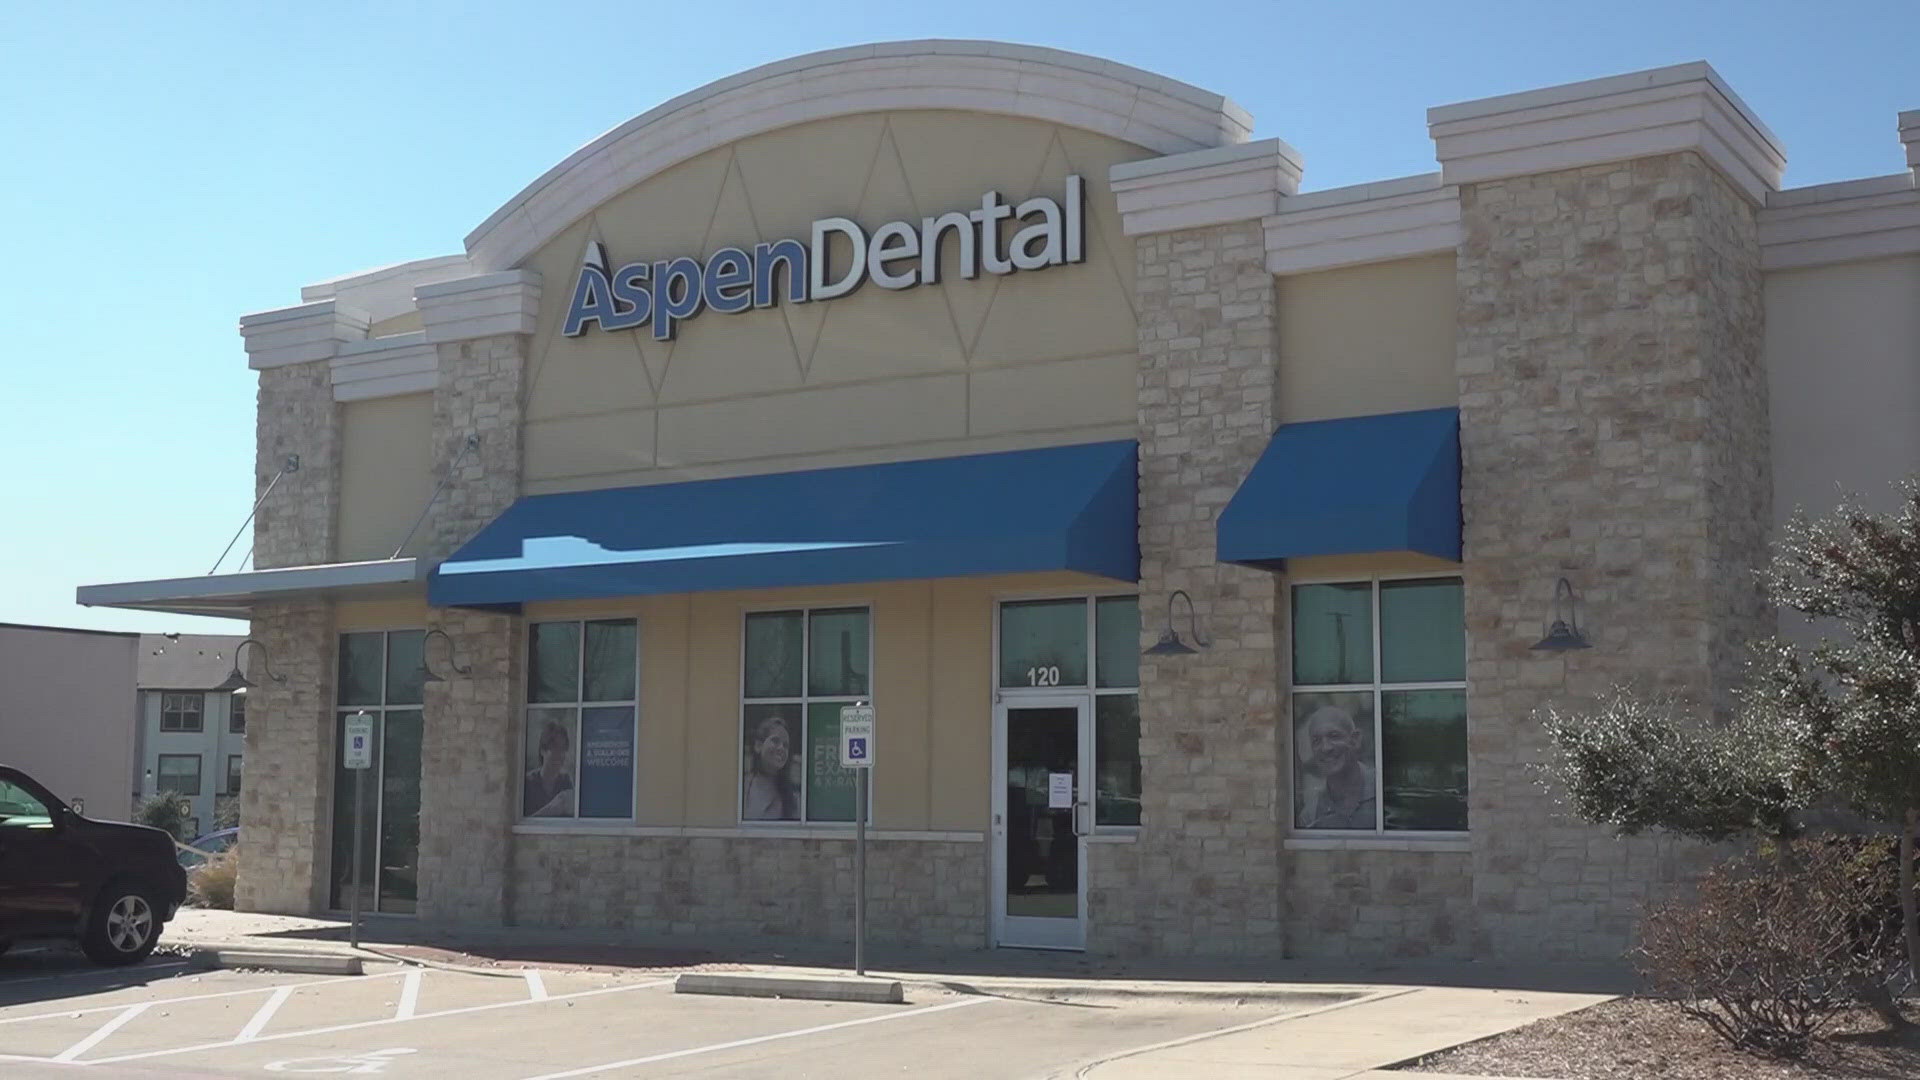 After a 6 Fix involving an Aspen Dental customer, there are still thousands of complaints and even a few lawsuits against the company.